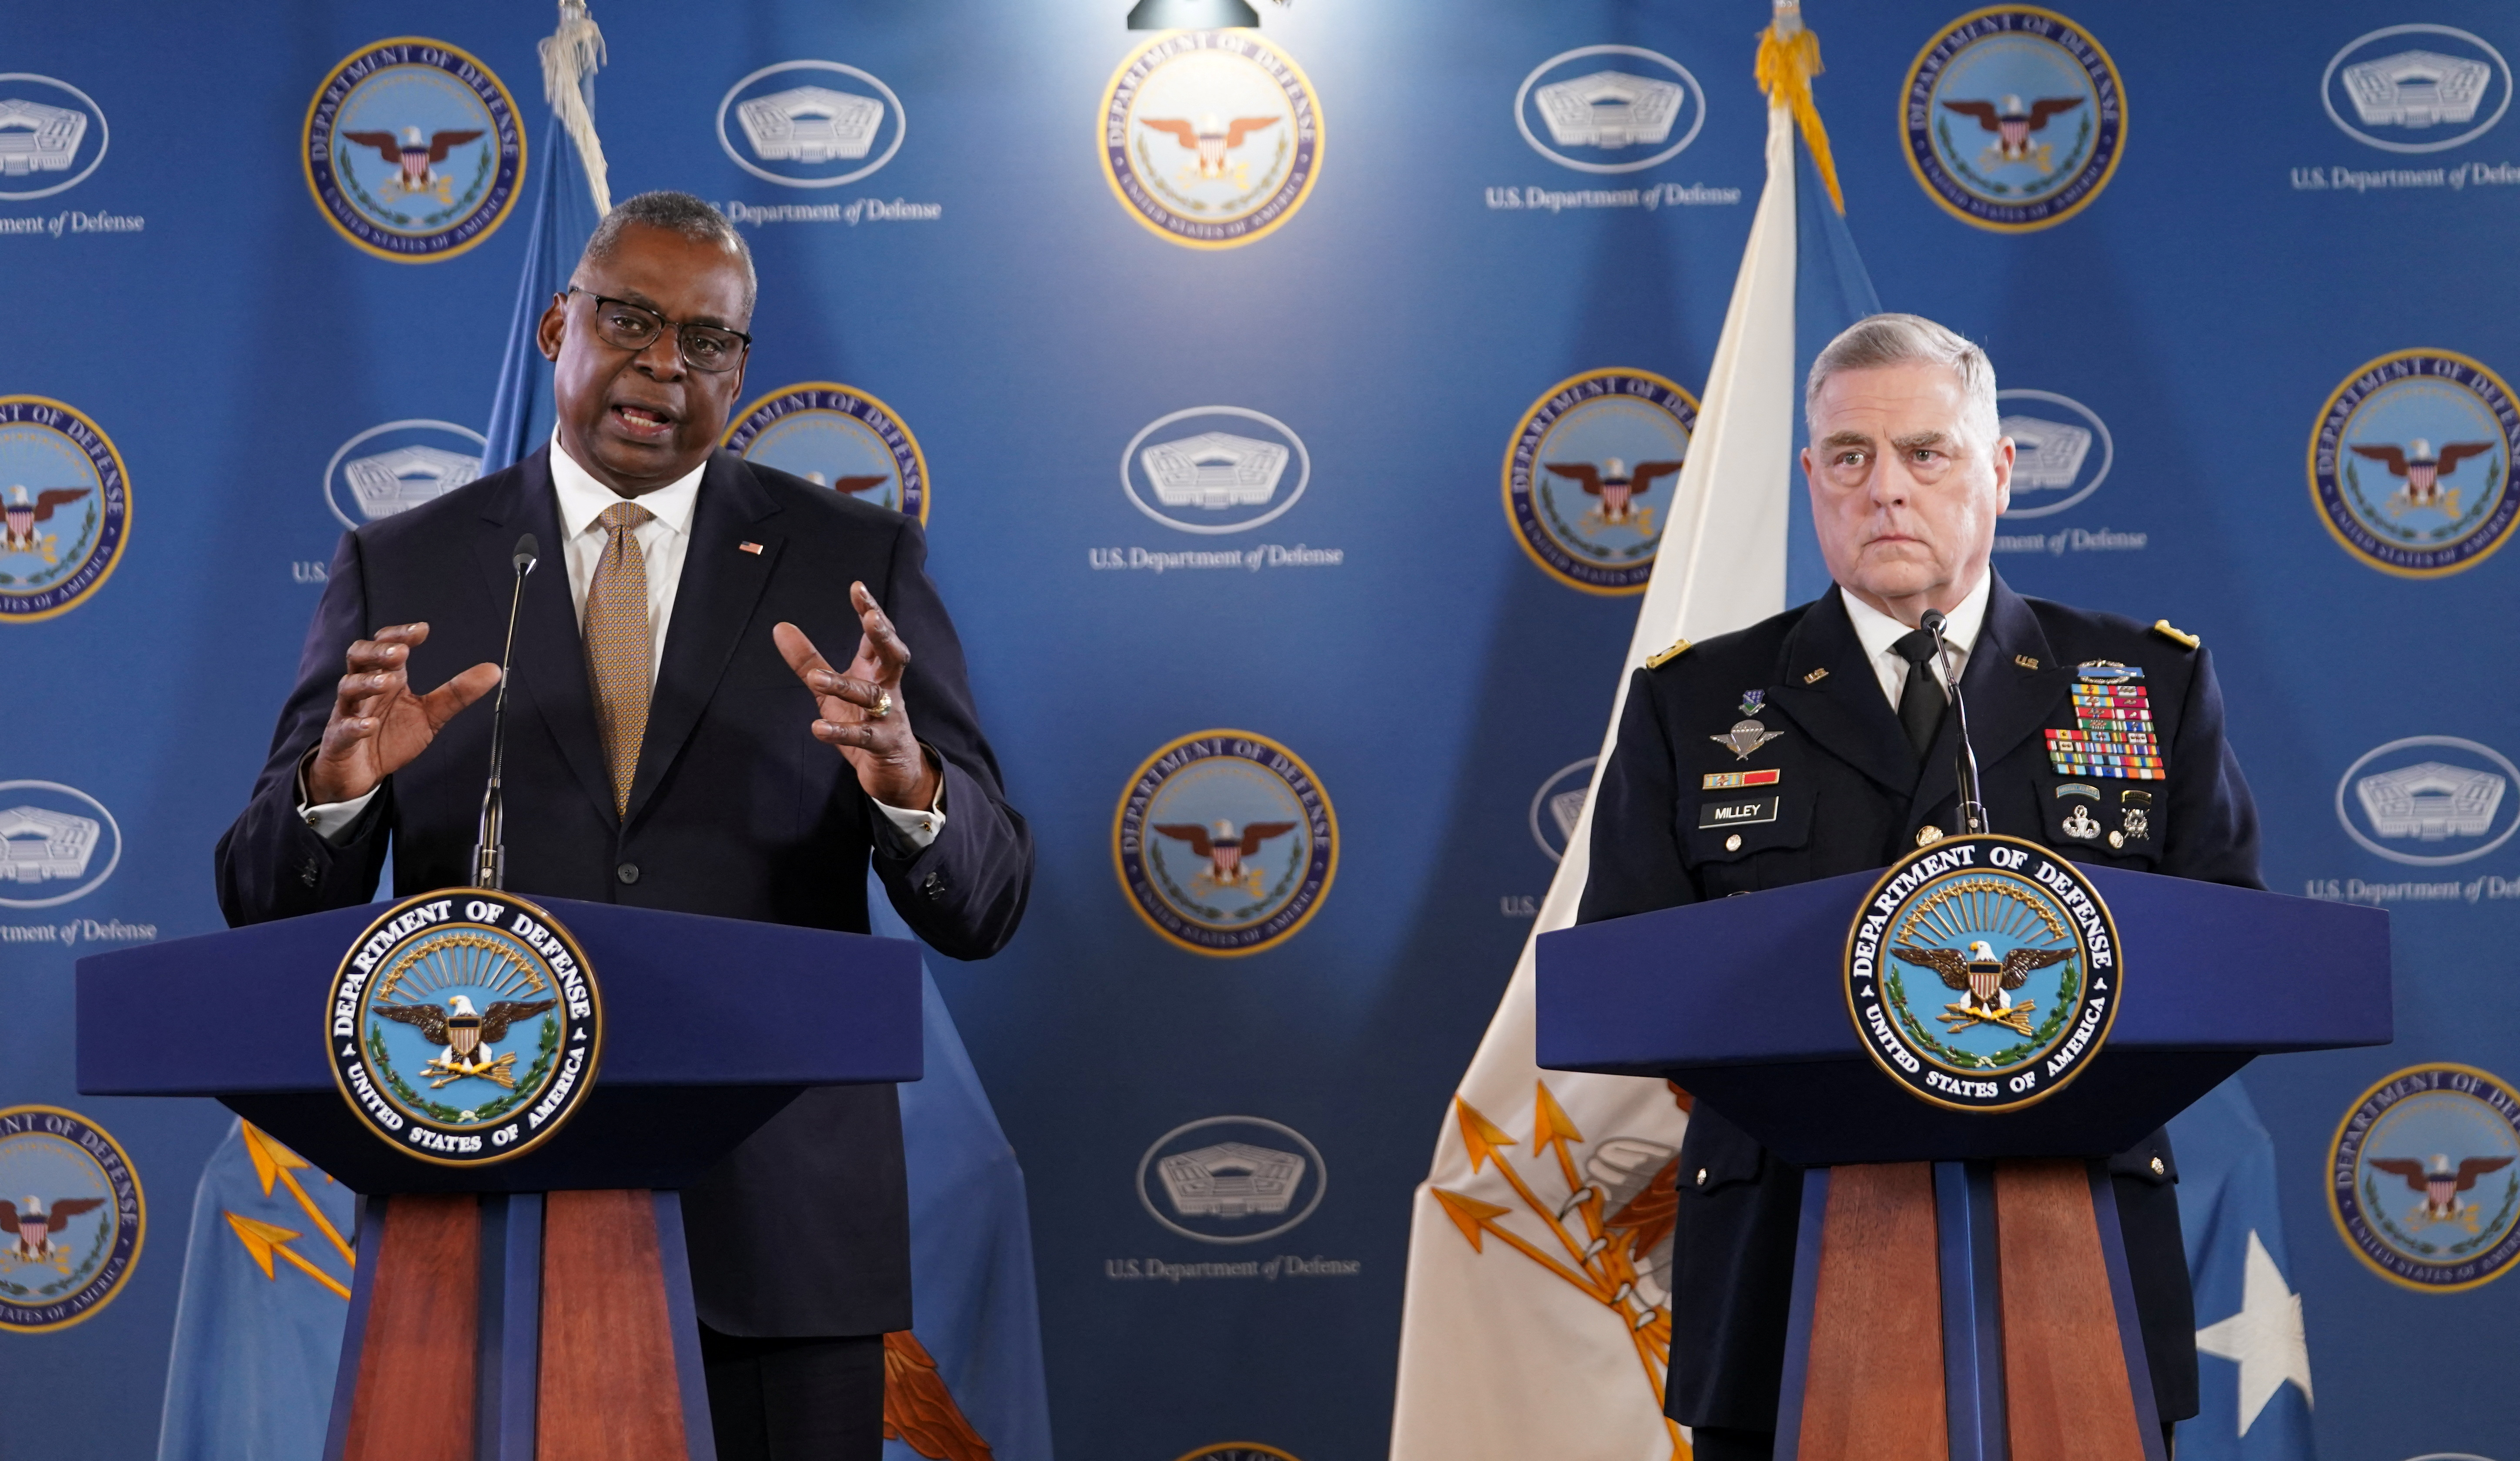 Chairman of the Joint Chiefs of Staff Milley and Defense Secretary Austin hold a press conference at the Pentagon, in Washington